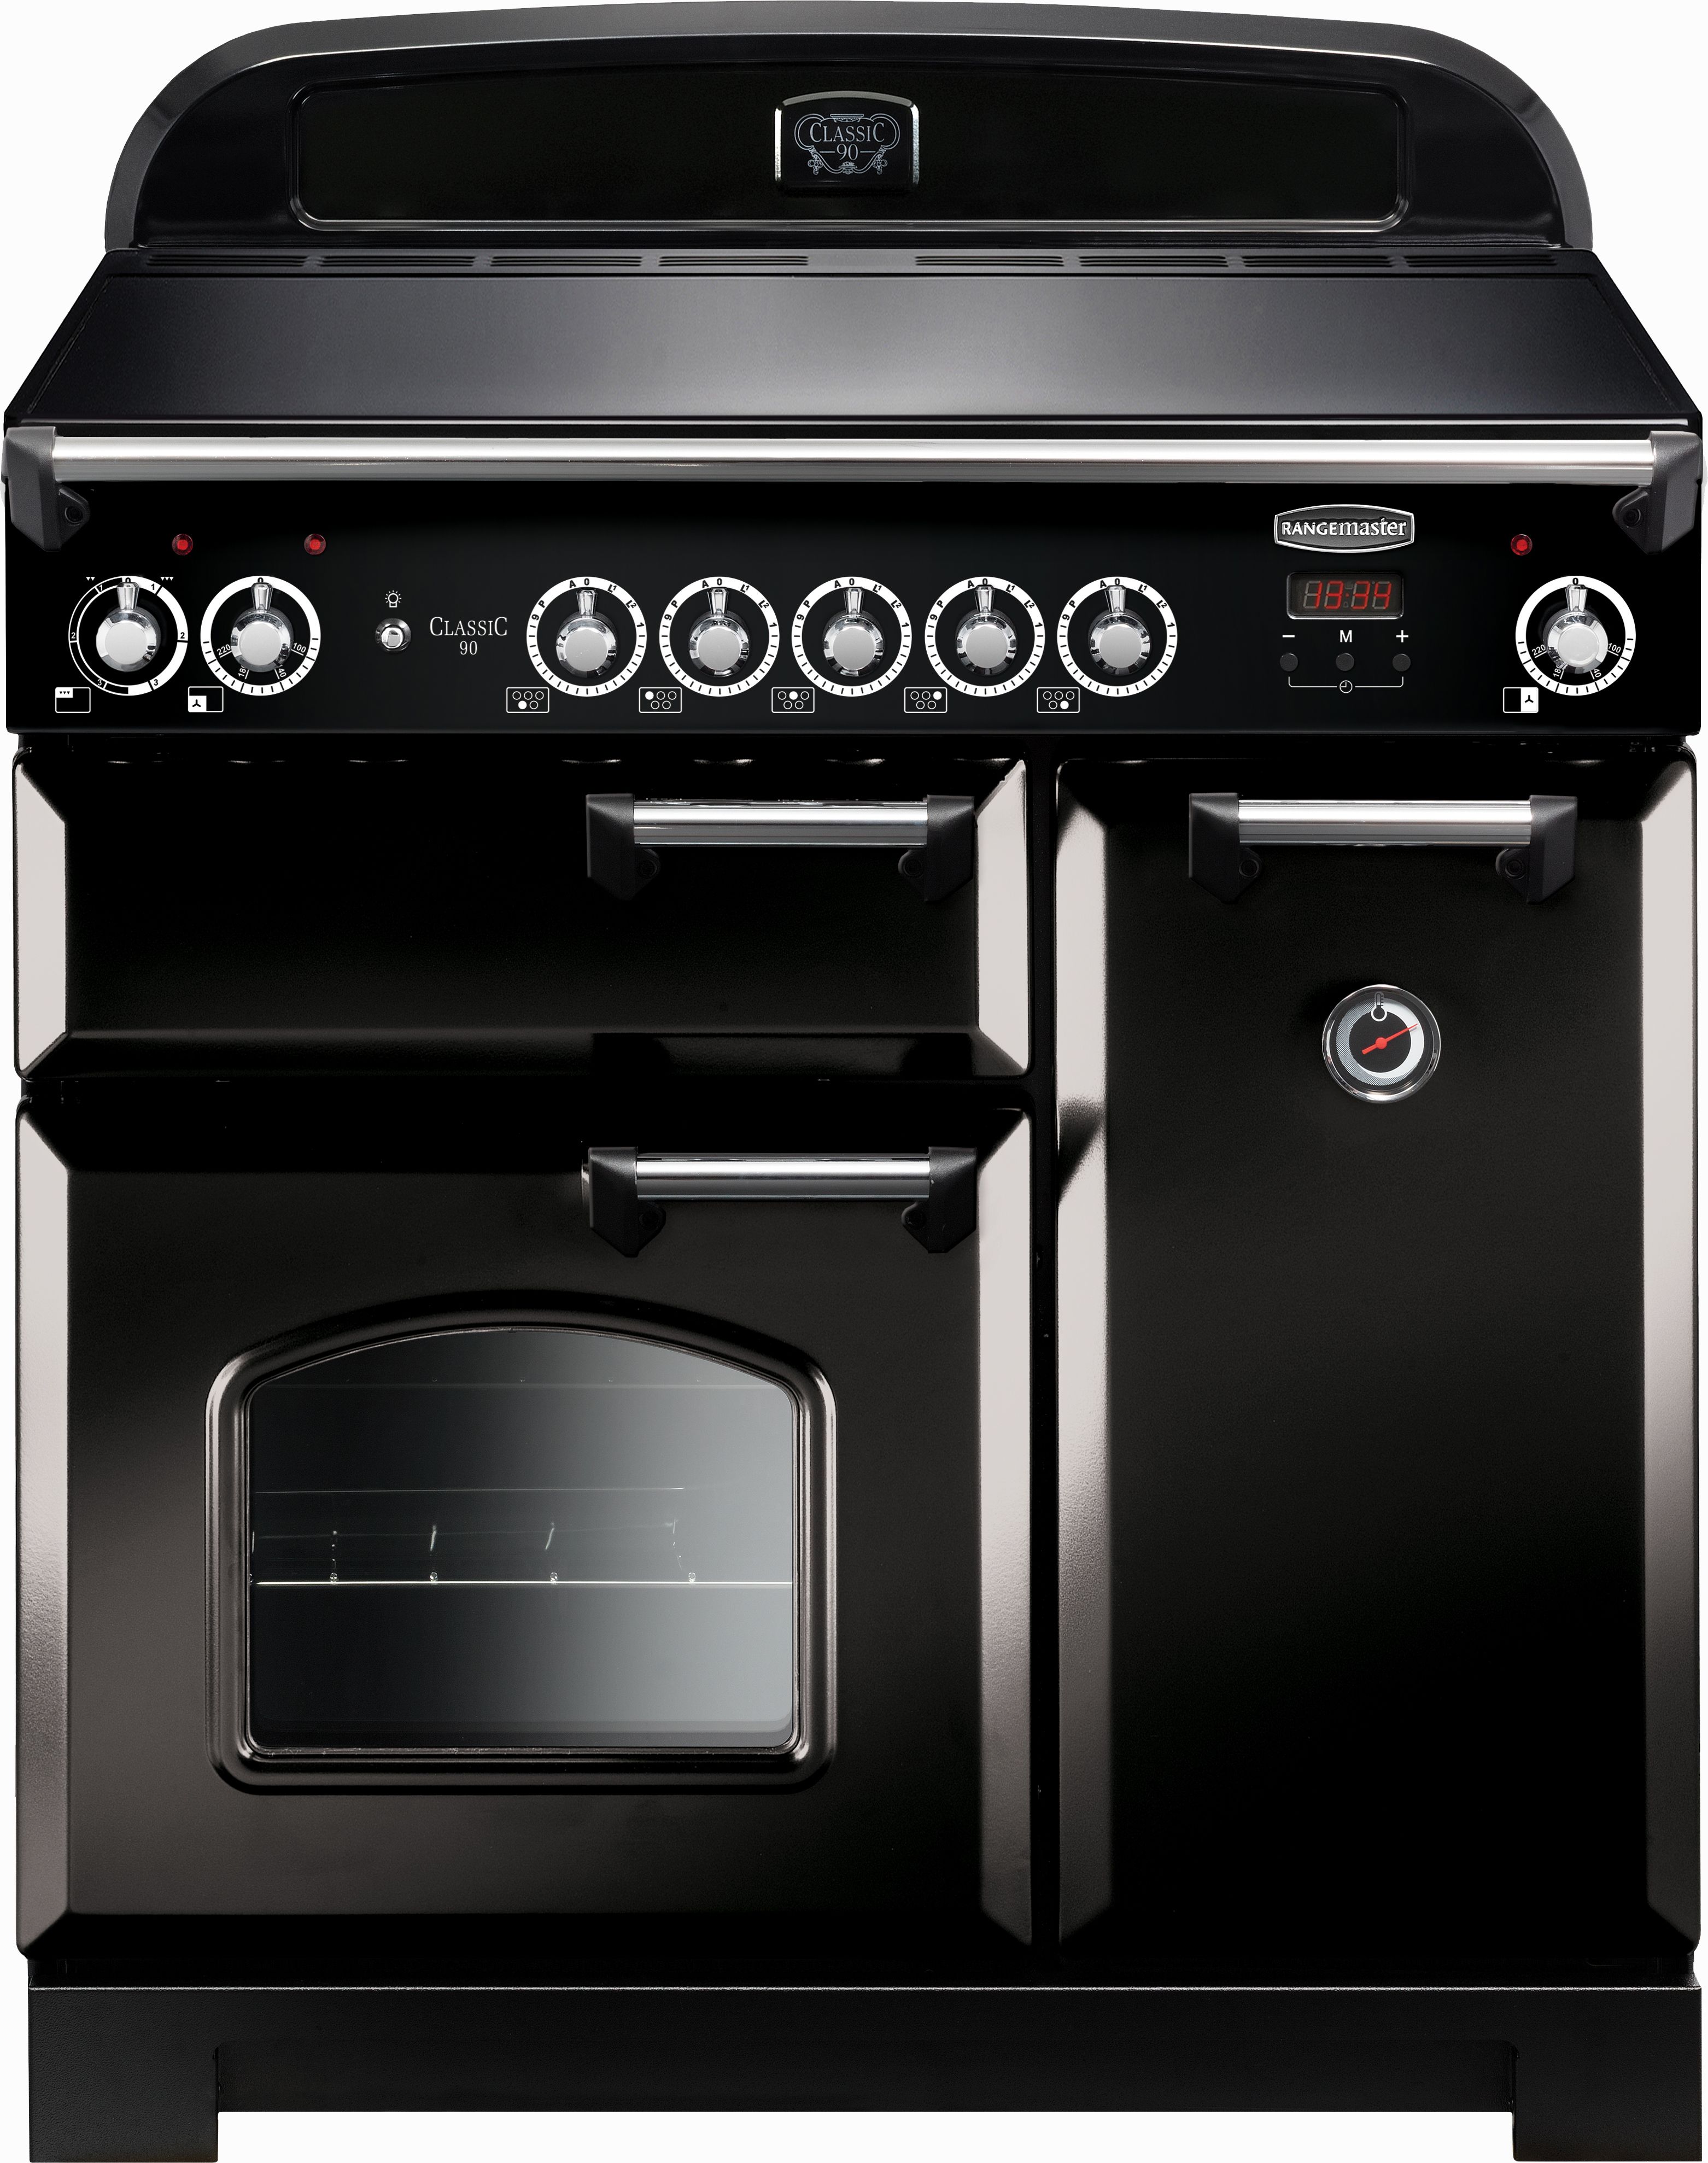 Rangemaster Classic CLA90EIBL/C 90cm Electric Range Cooker with Induction Hob - Black / Chrome - A/A Rated, Black